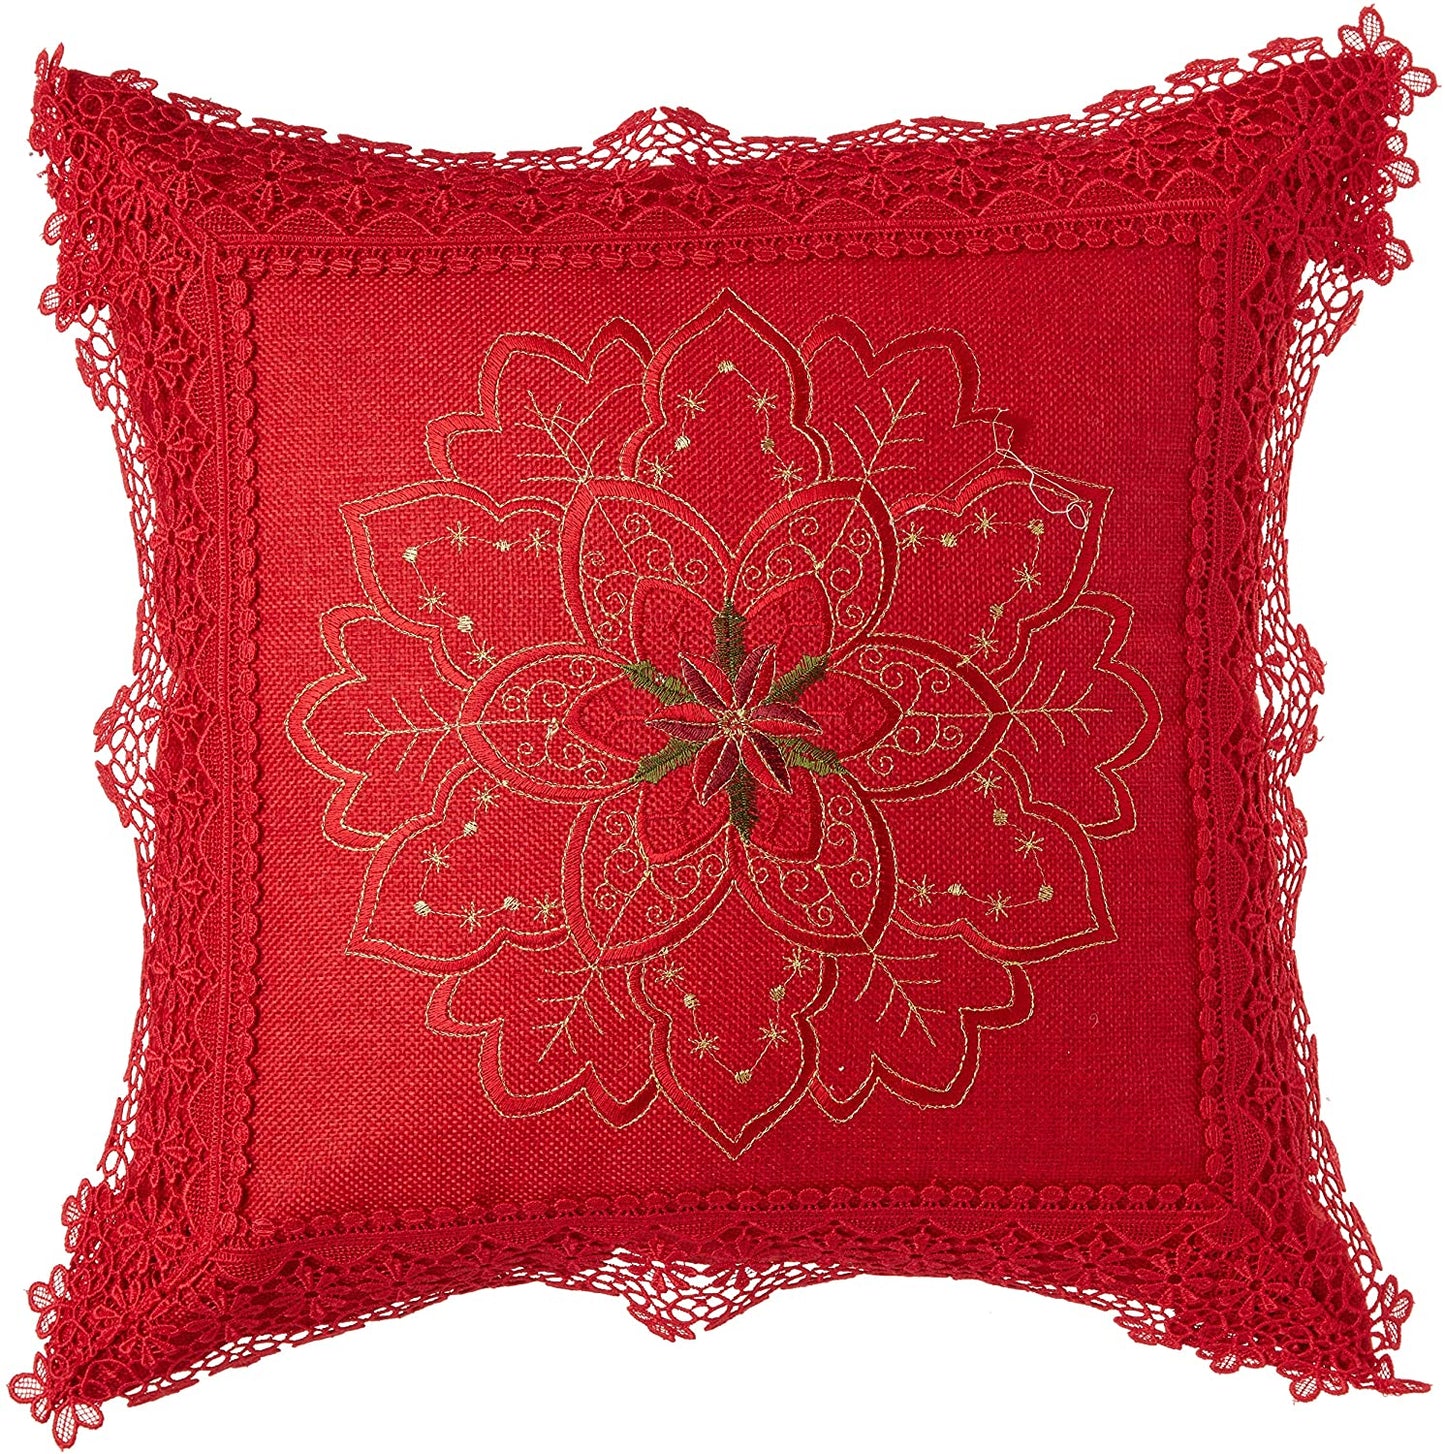 Christmas Braided Holly Lace Pattern Decorative Throw Pillow Cover